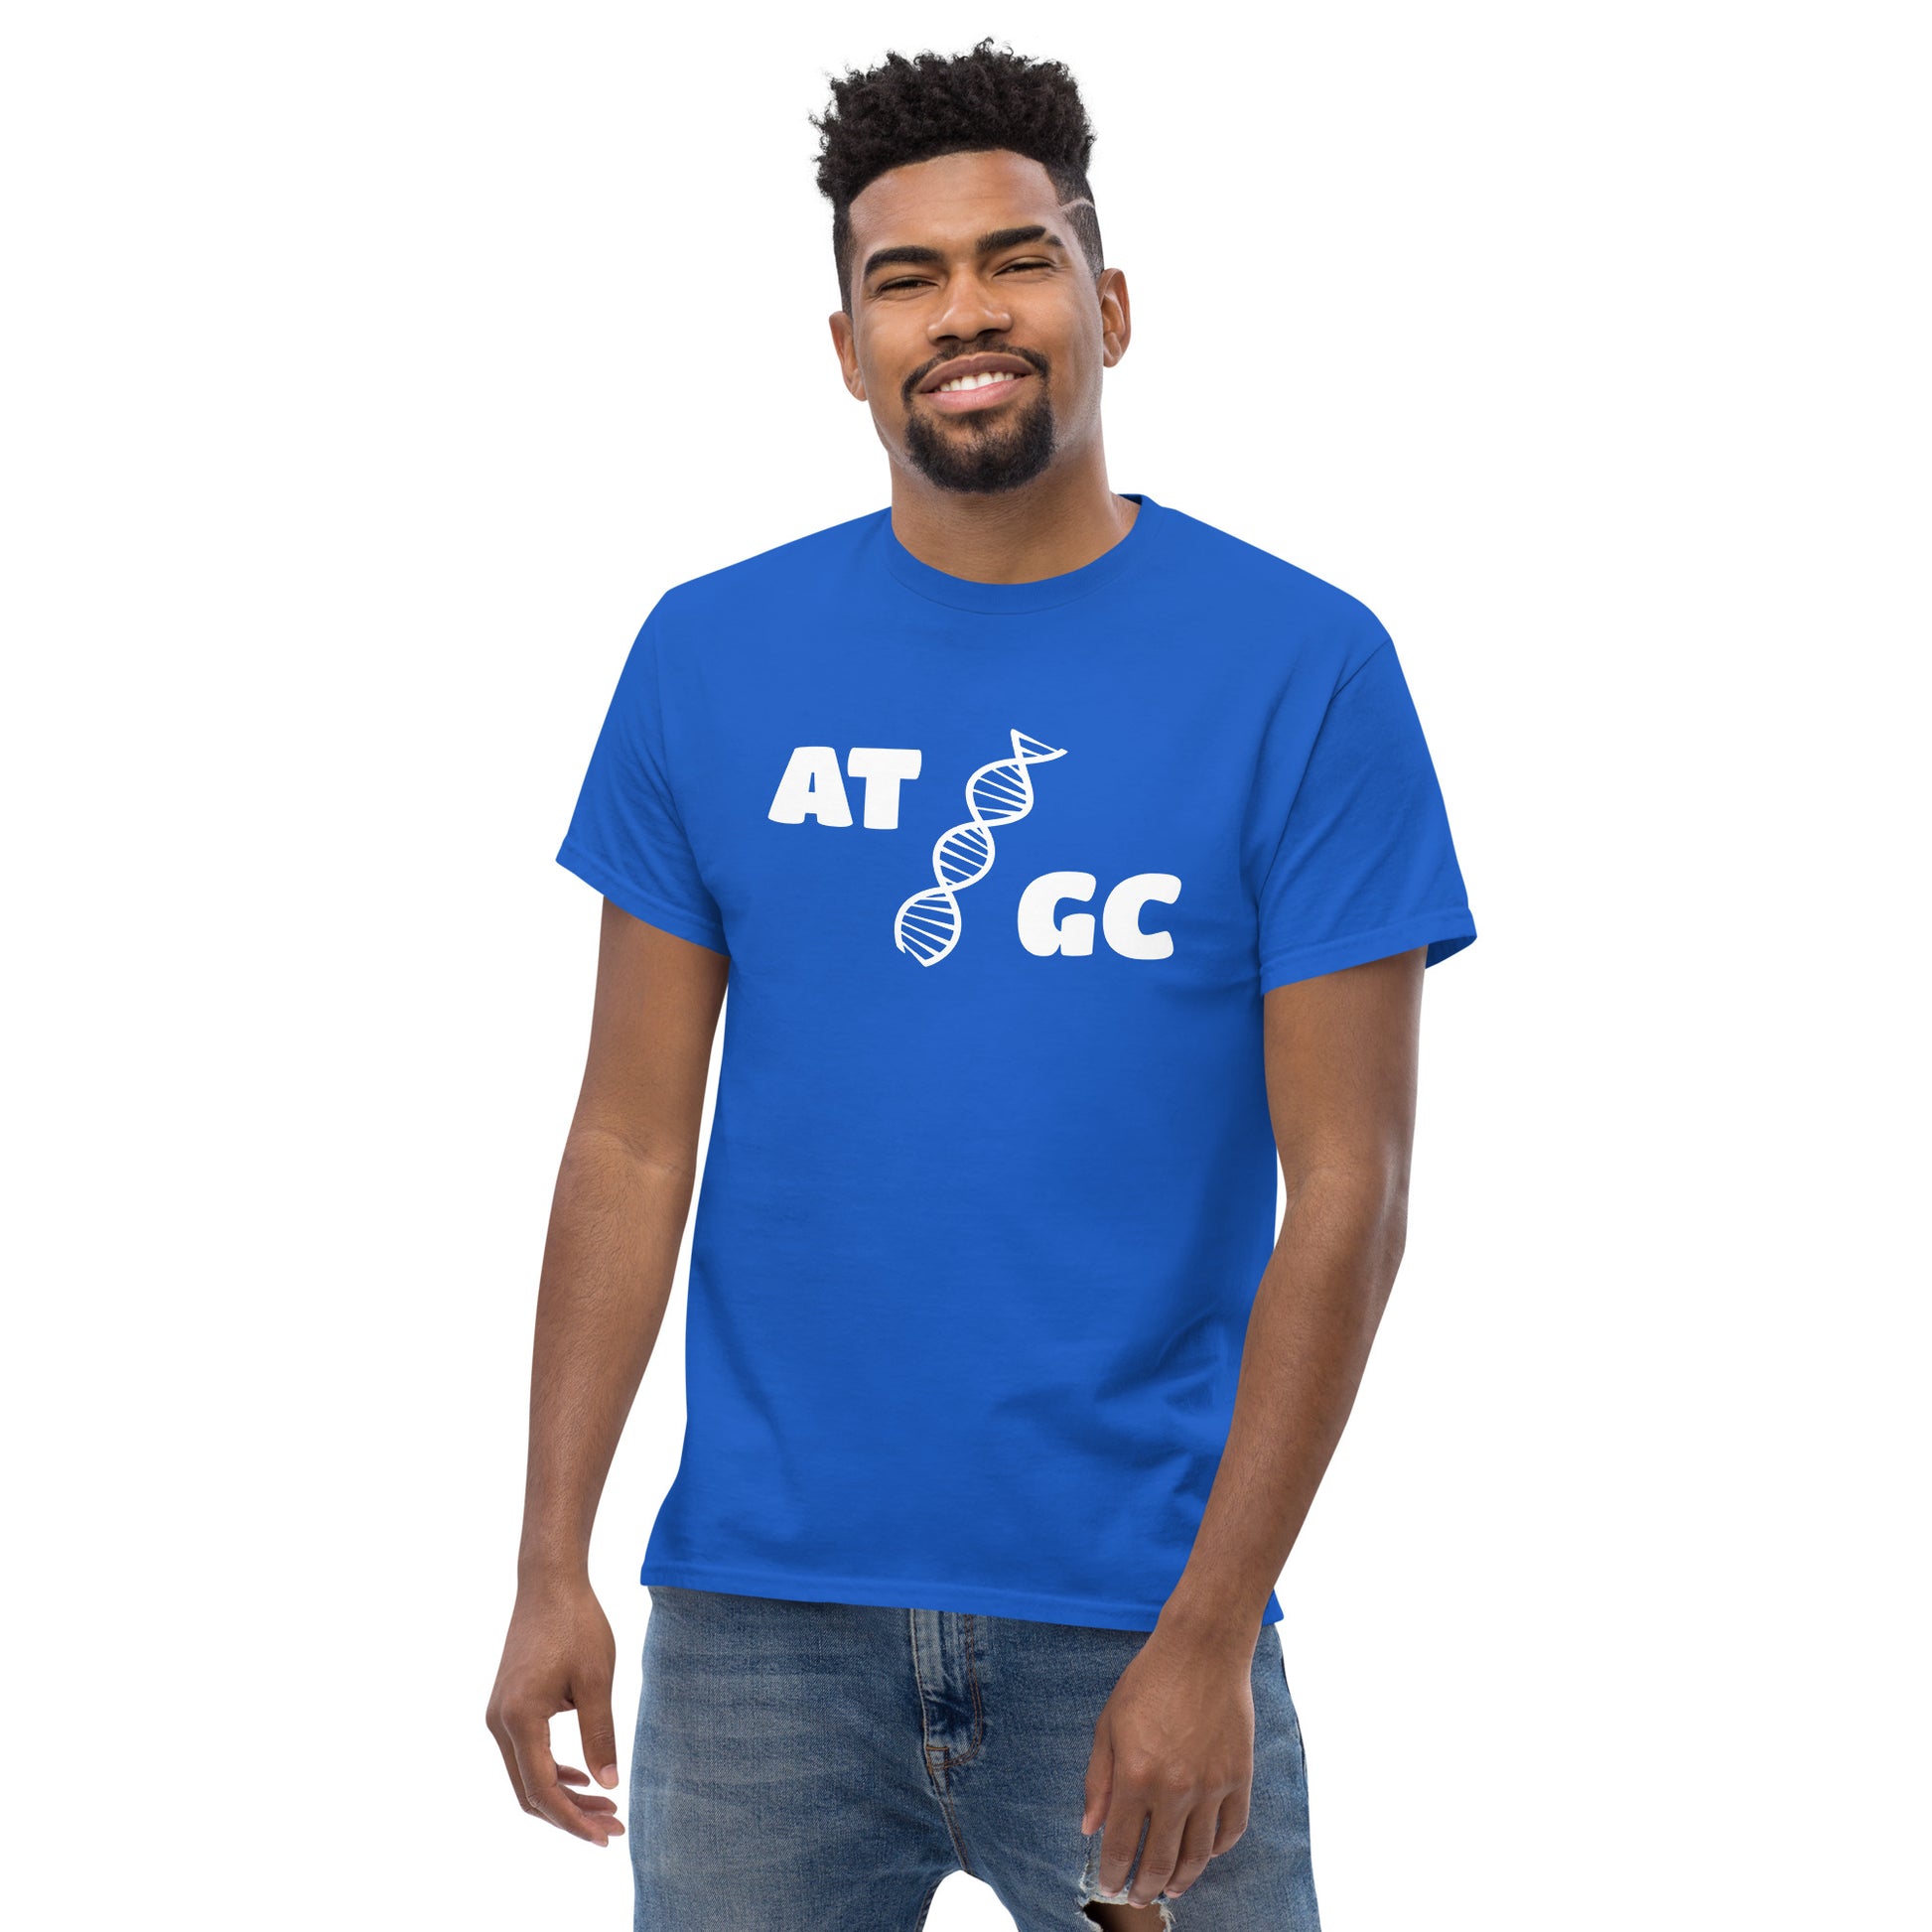 Men with royal blue t-shirt with image of a DNA string and the text "ATGC"